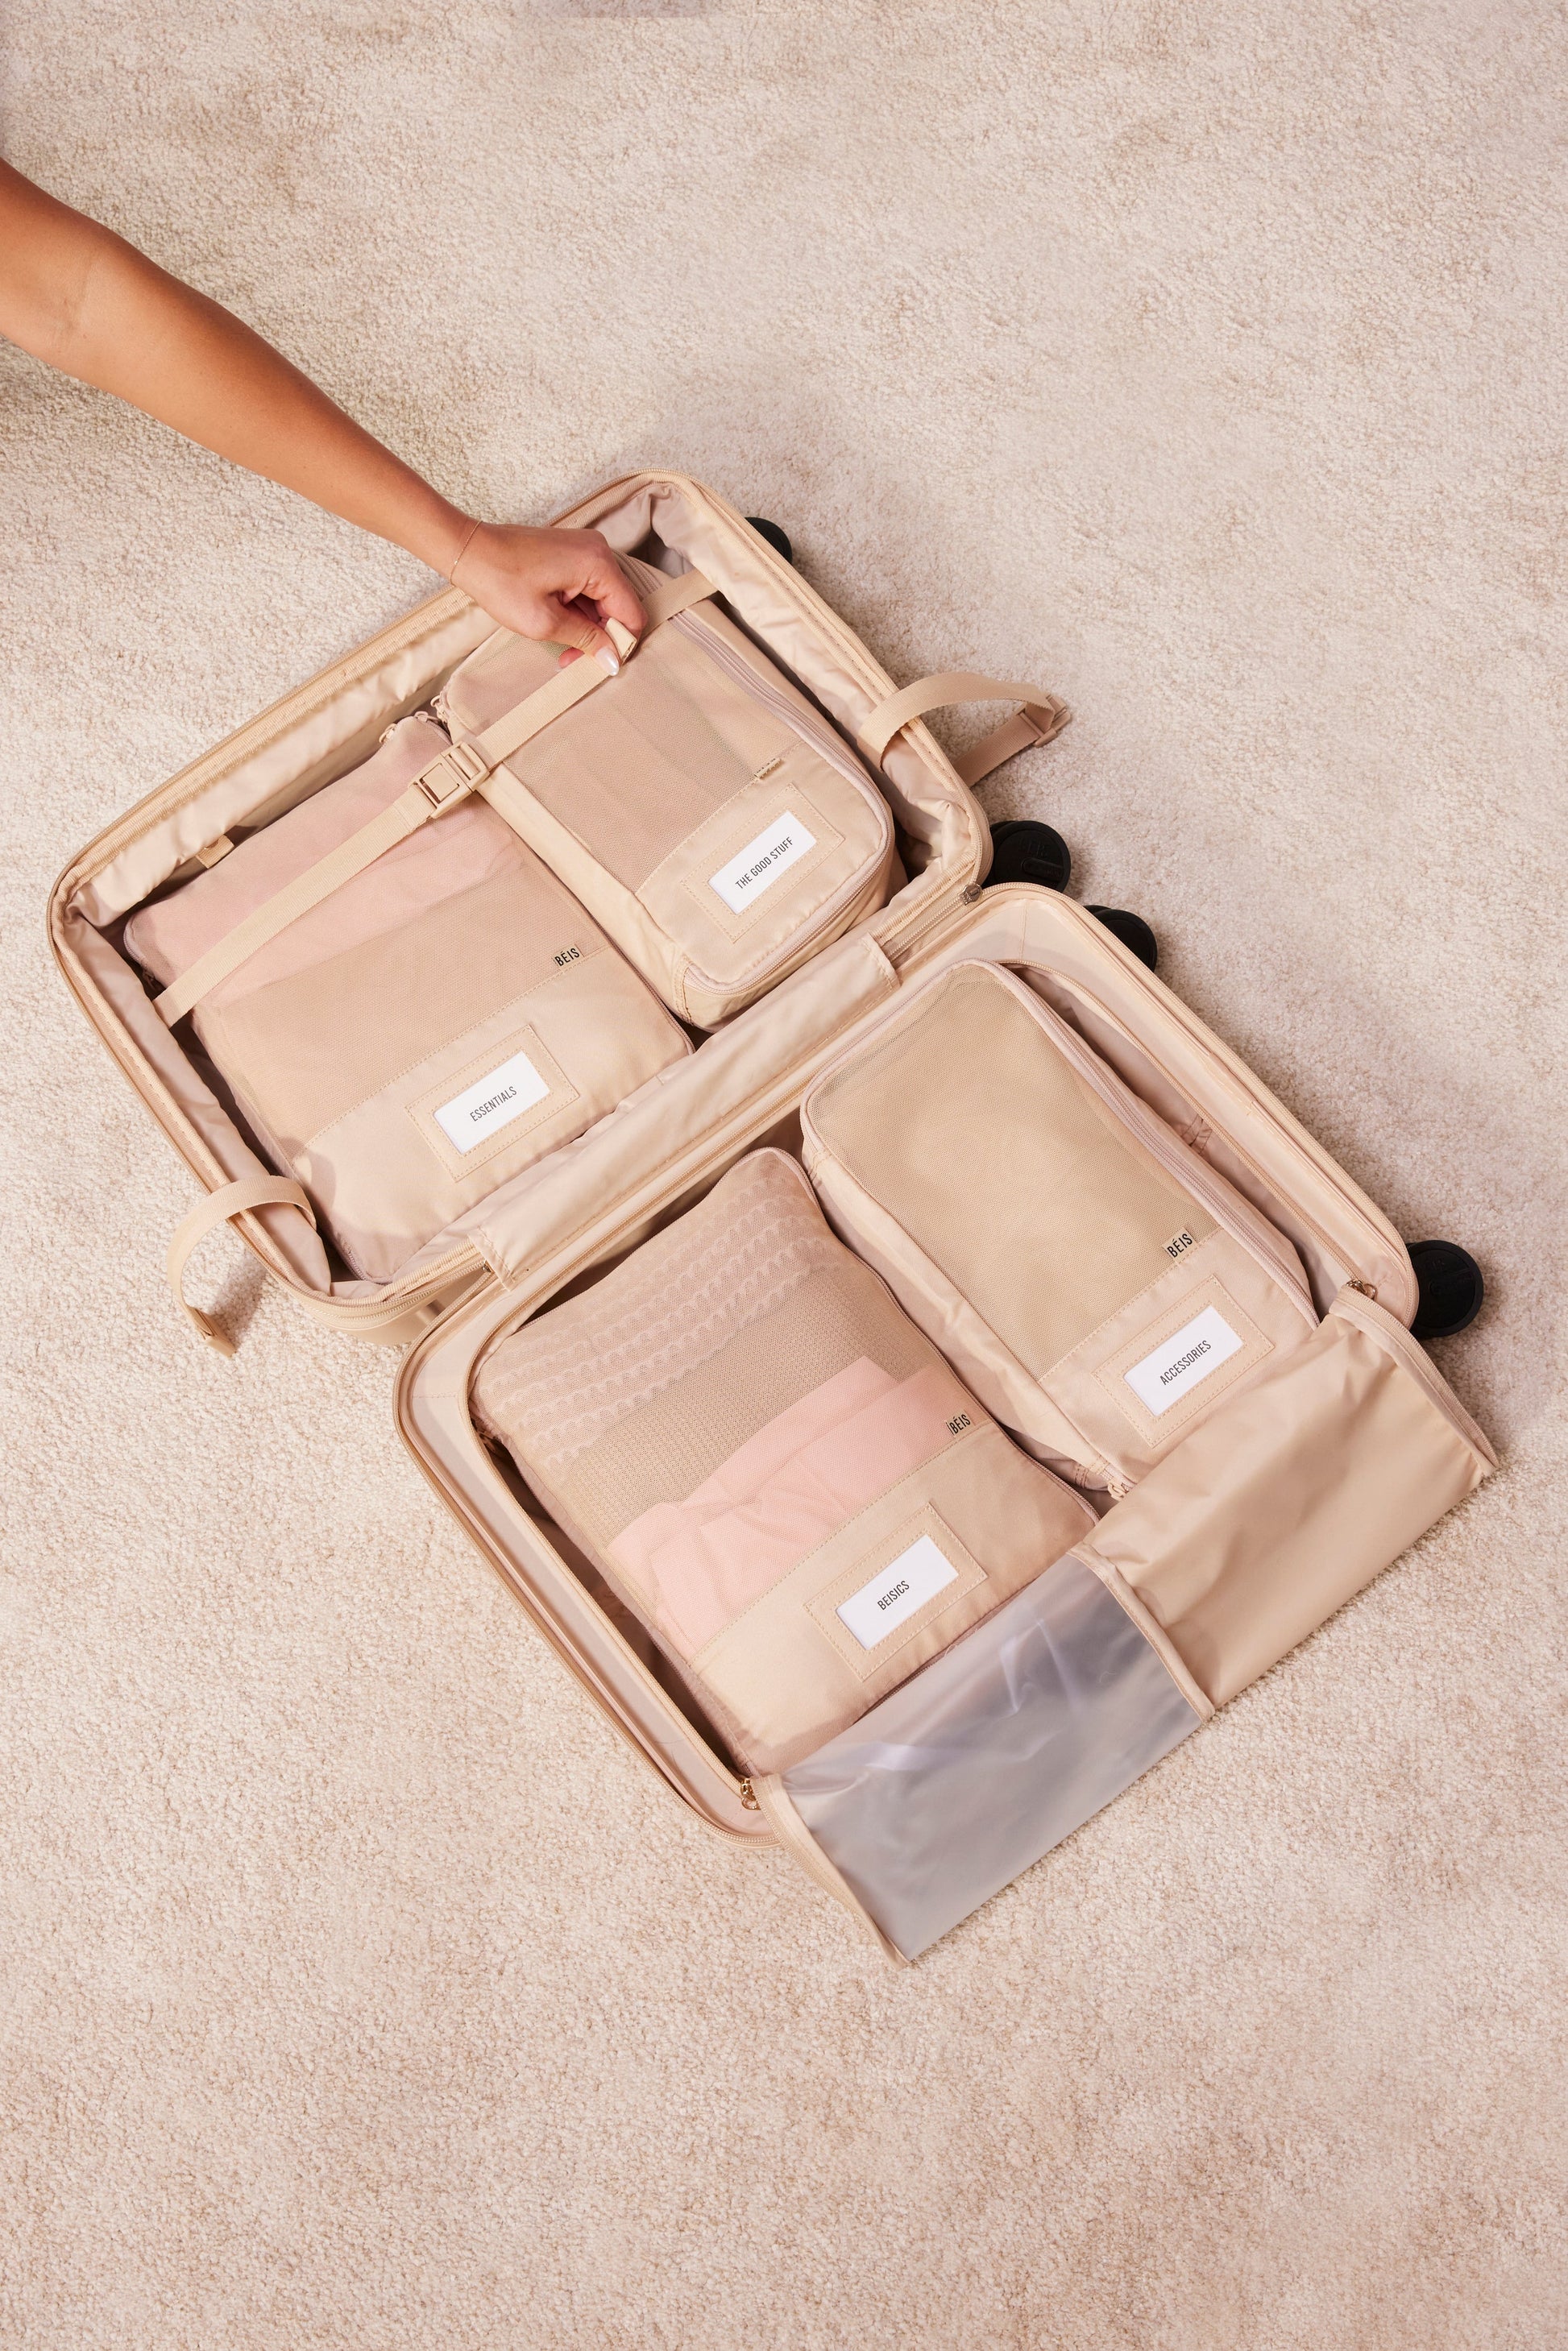 Béis The Compression Set of 6 Packing Cubes in Beige